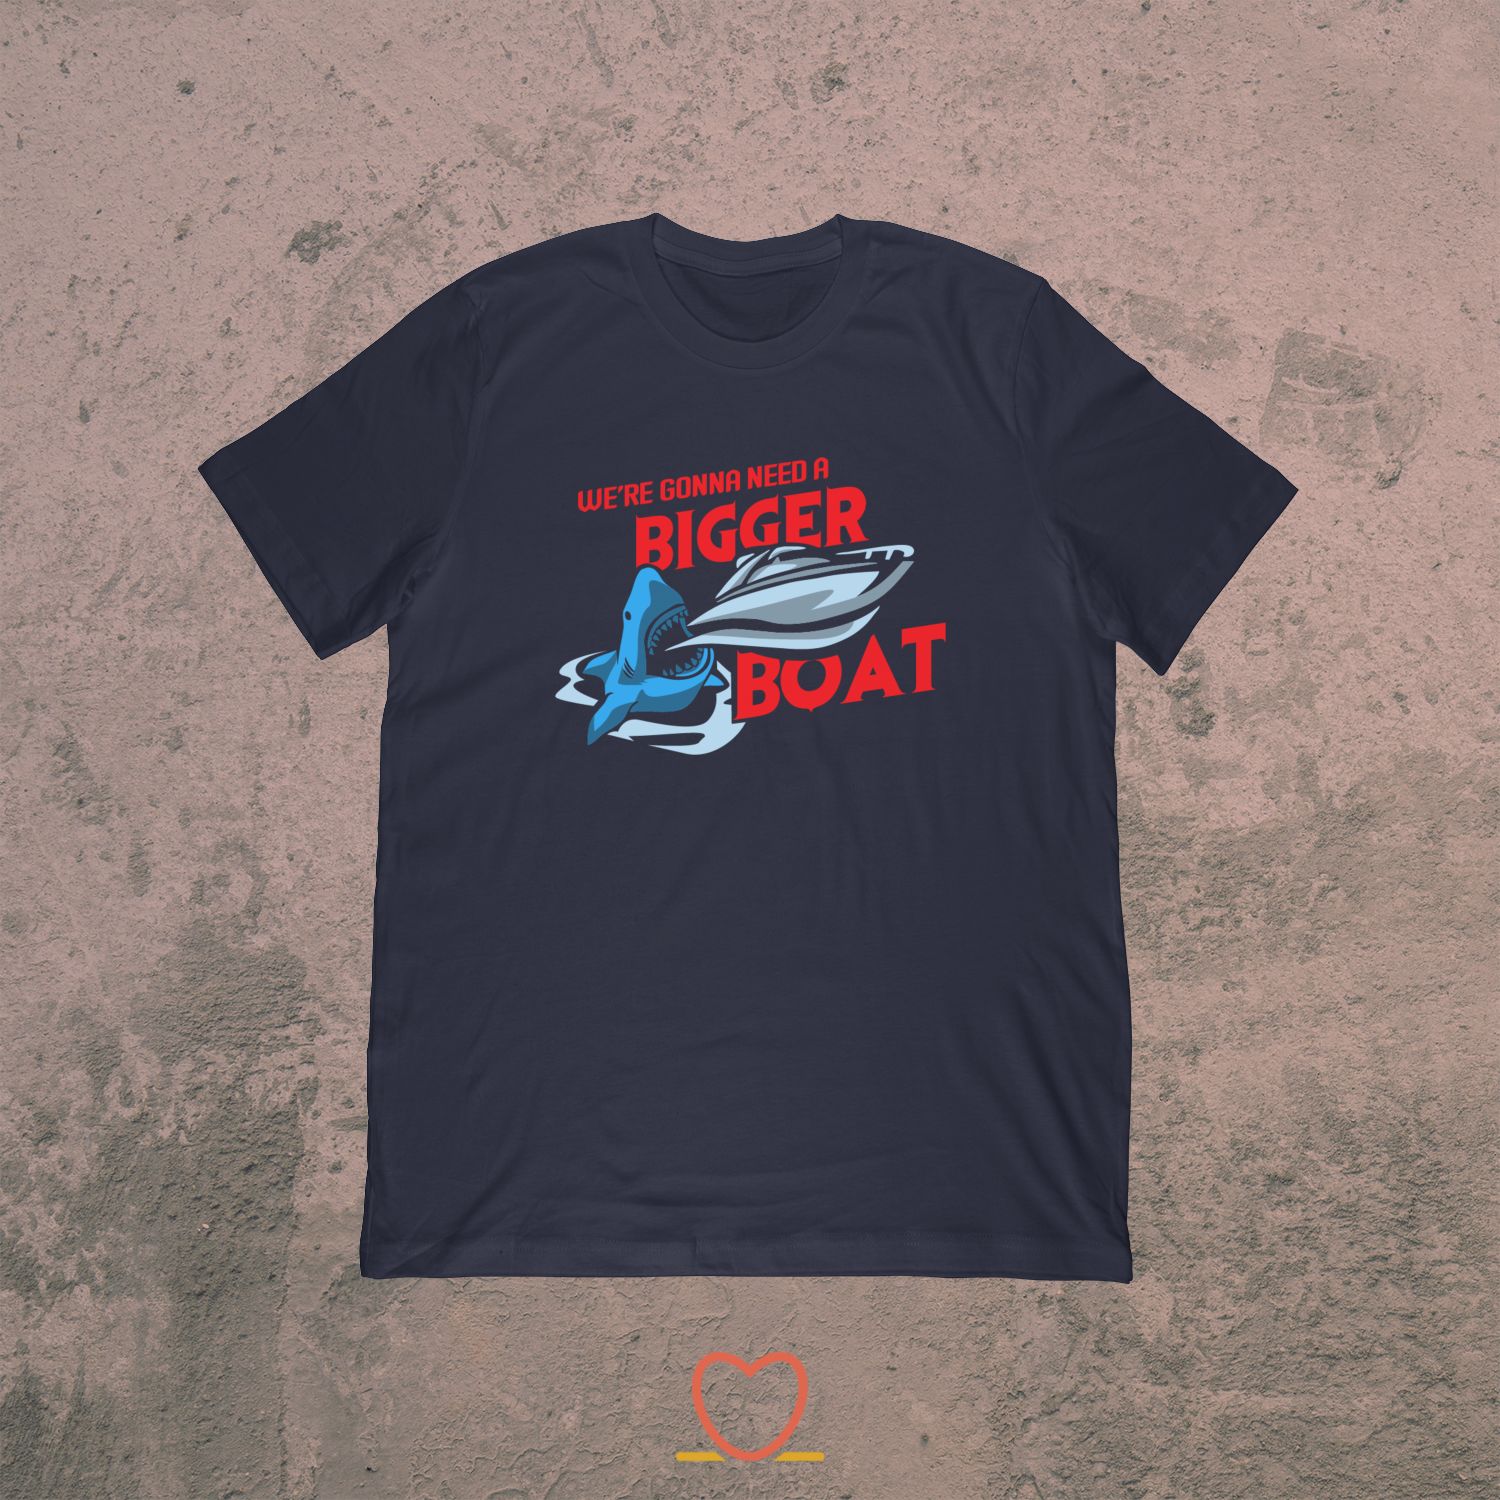 We’re Gonna Need a Bigger Boat – Funny Boat Tee